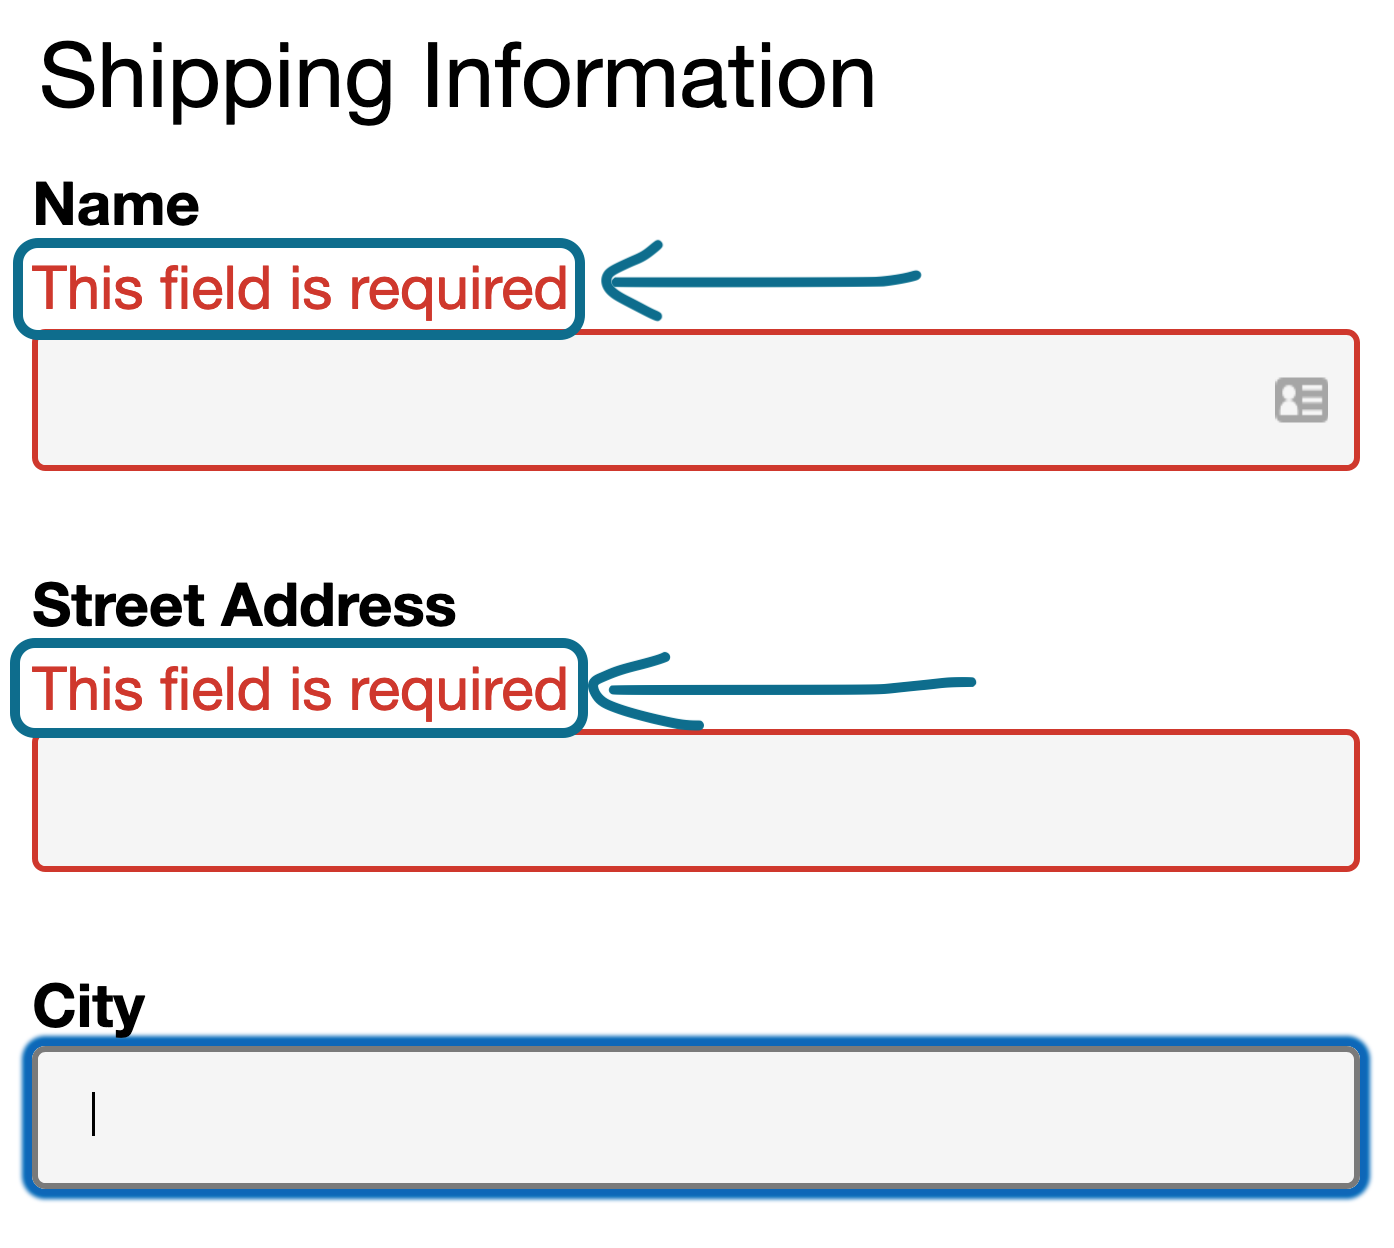 Sample shipping form showing two inline form errors highlighted